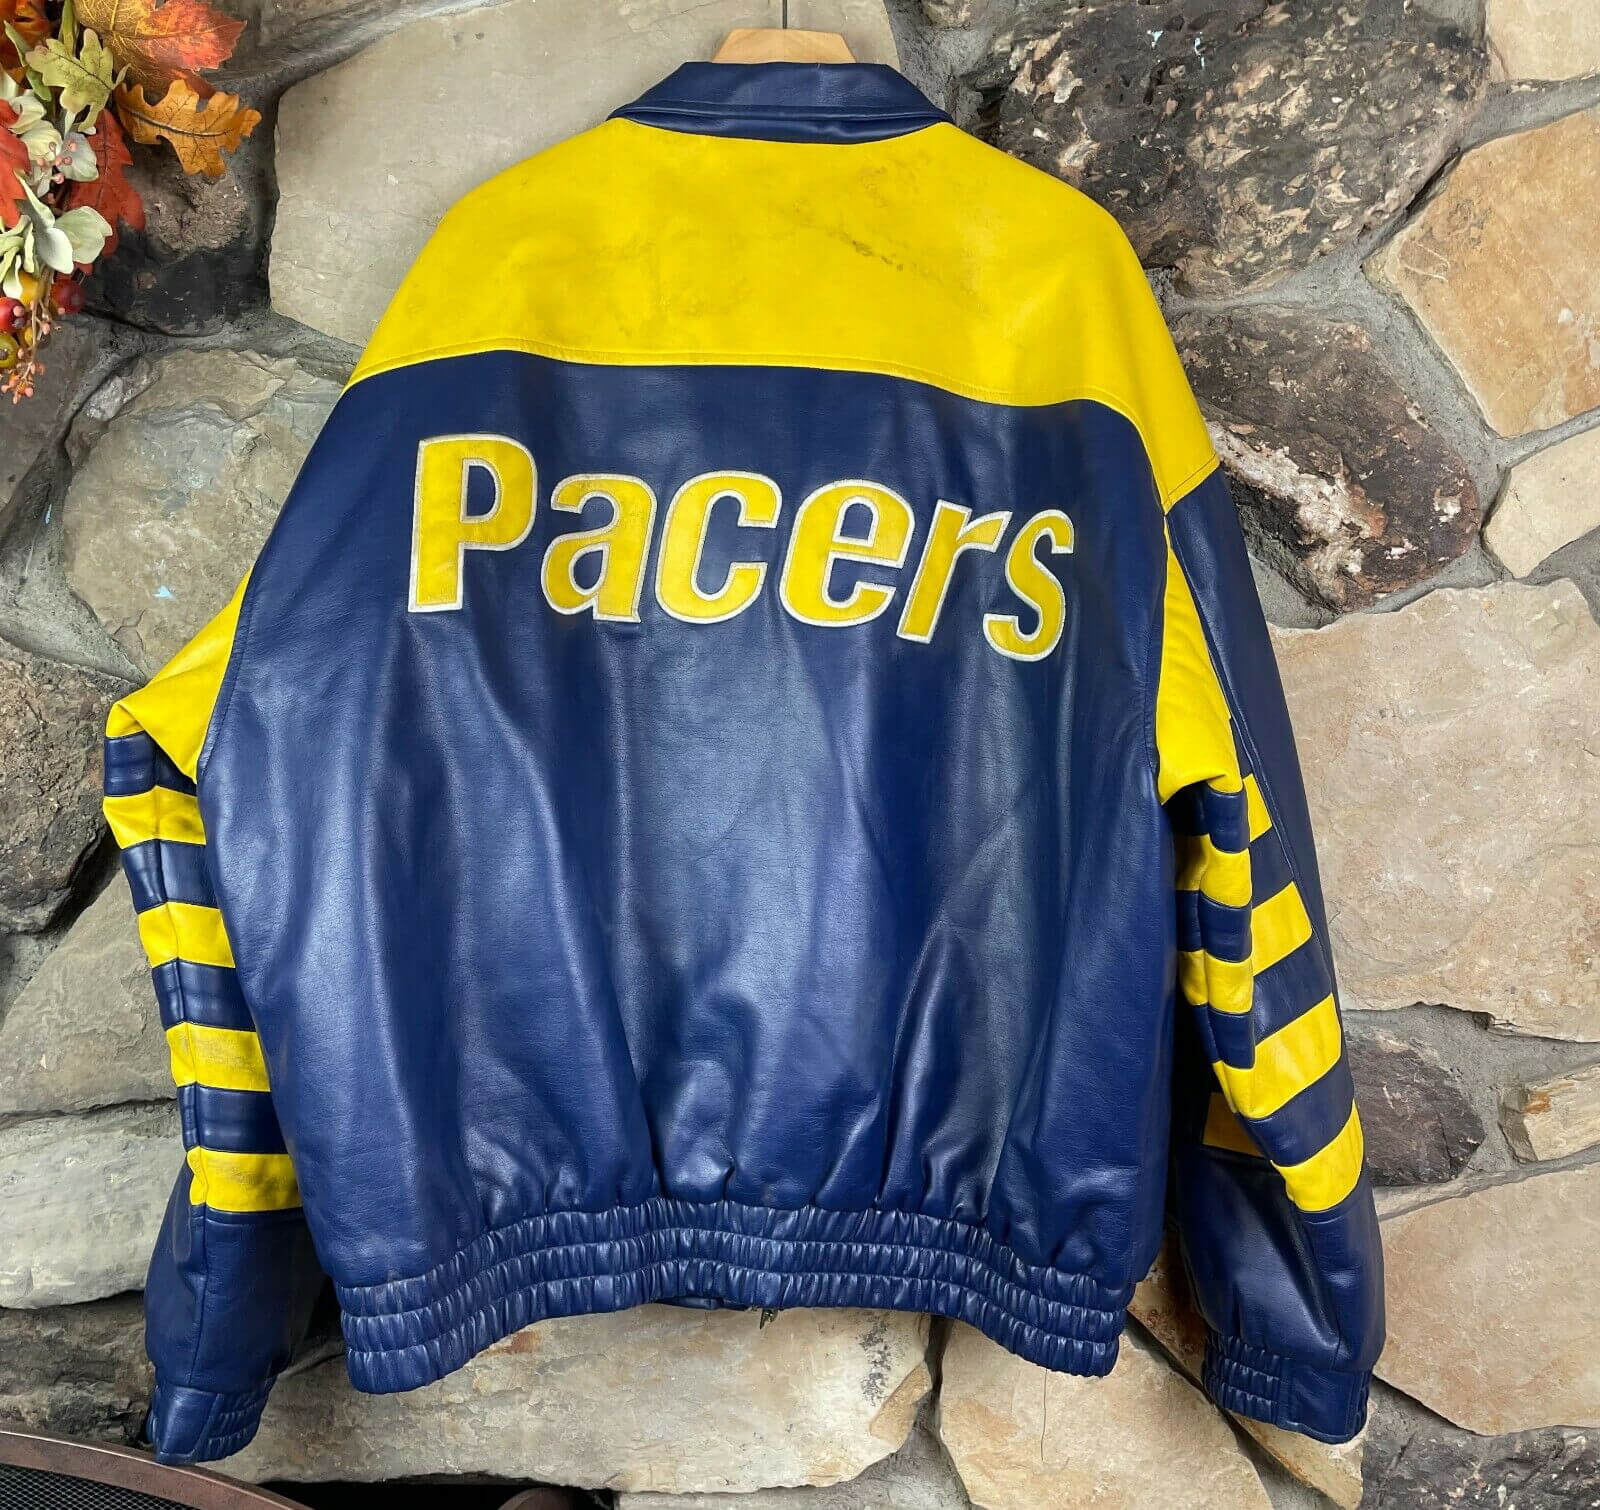 The worn, hand-painted black-over-Indiana Pacers-colored